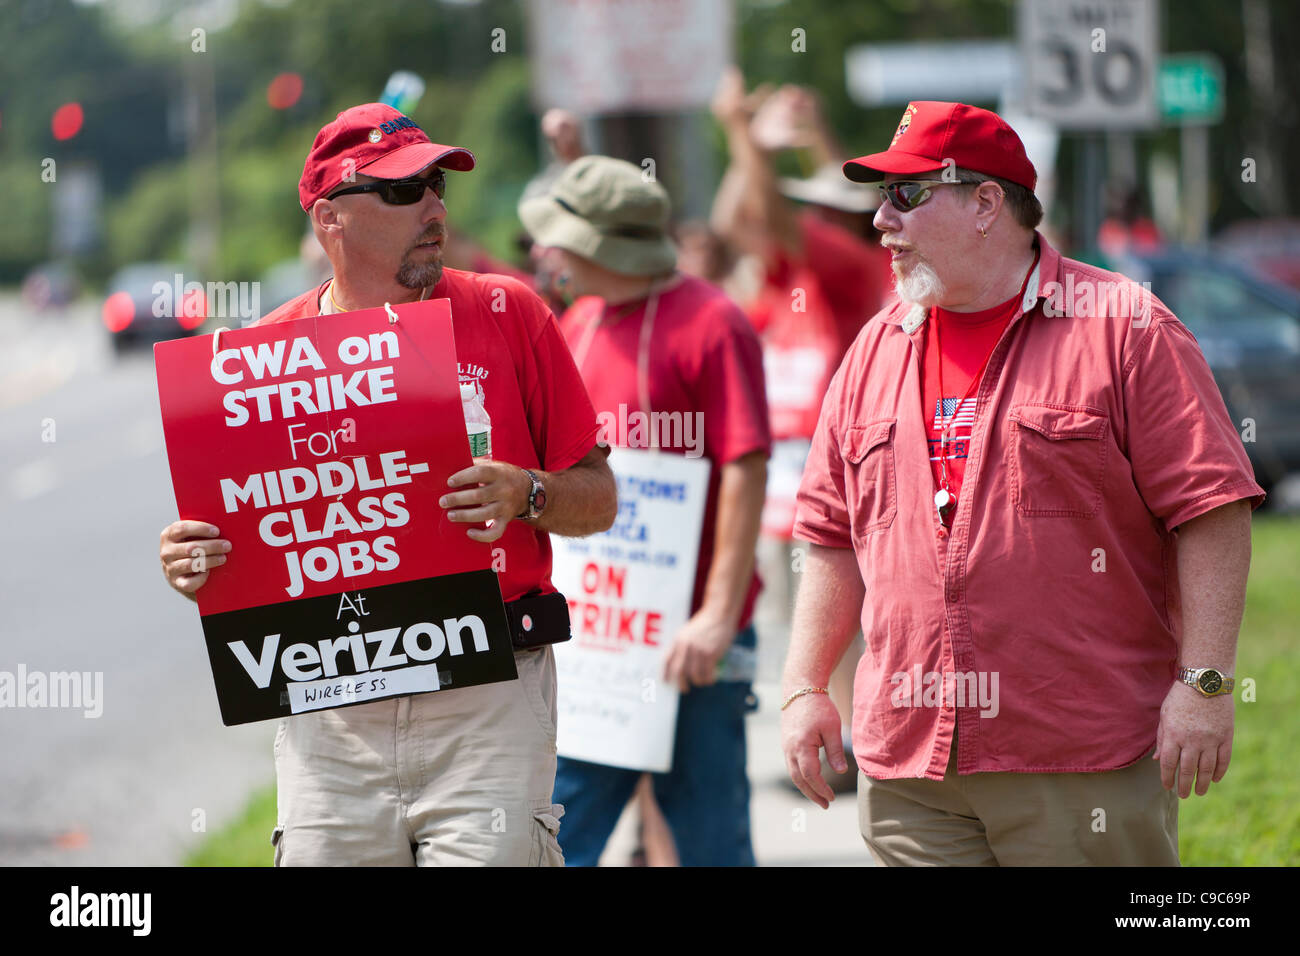 On-strike Verizon employees picket on the street in front of a Verizon Wireless store Stock Photo